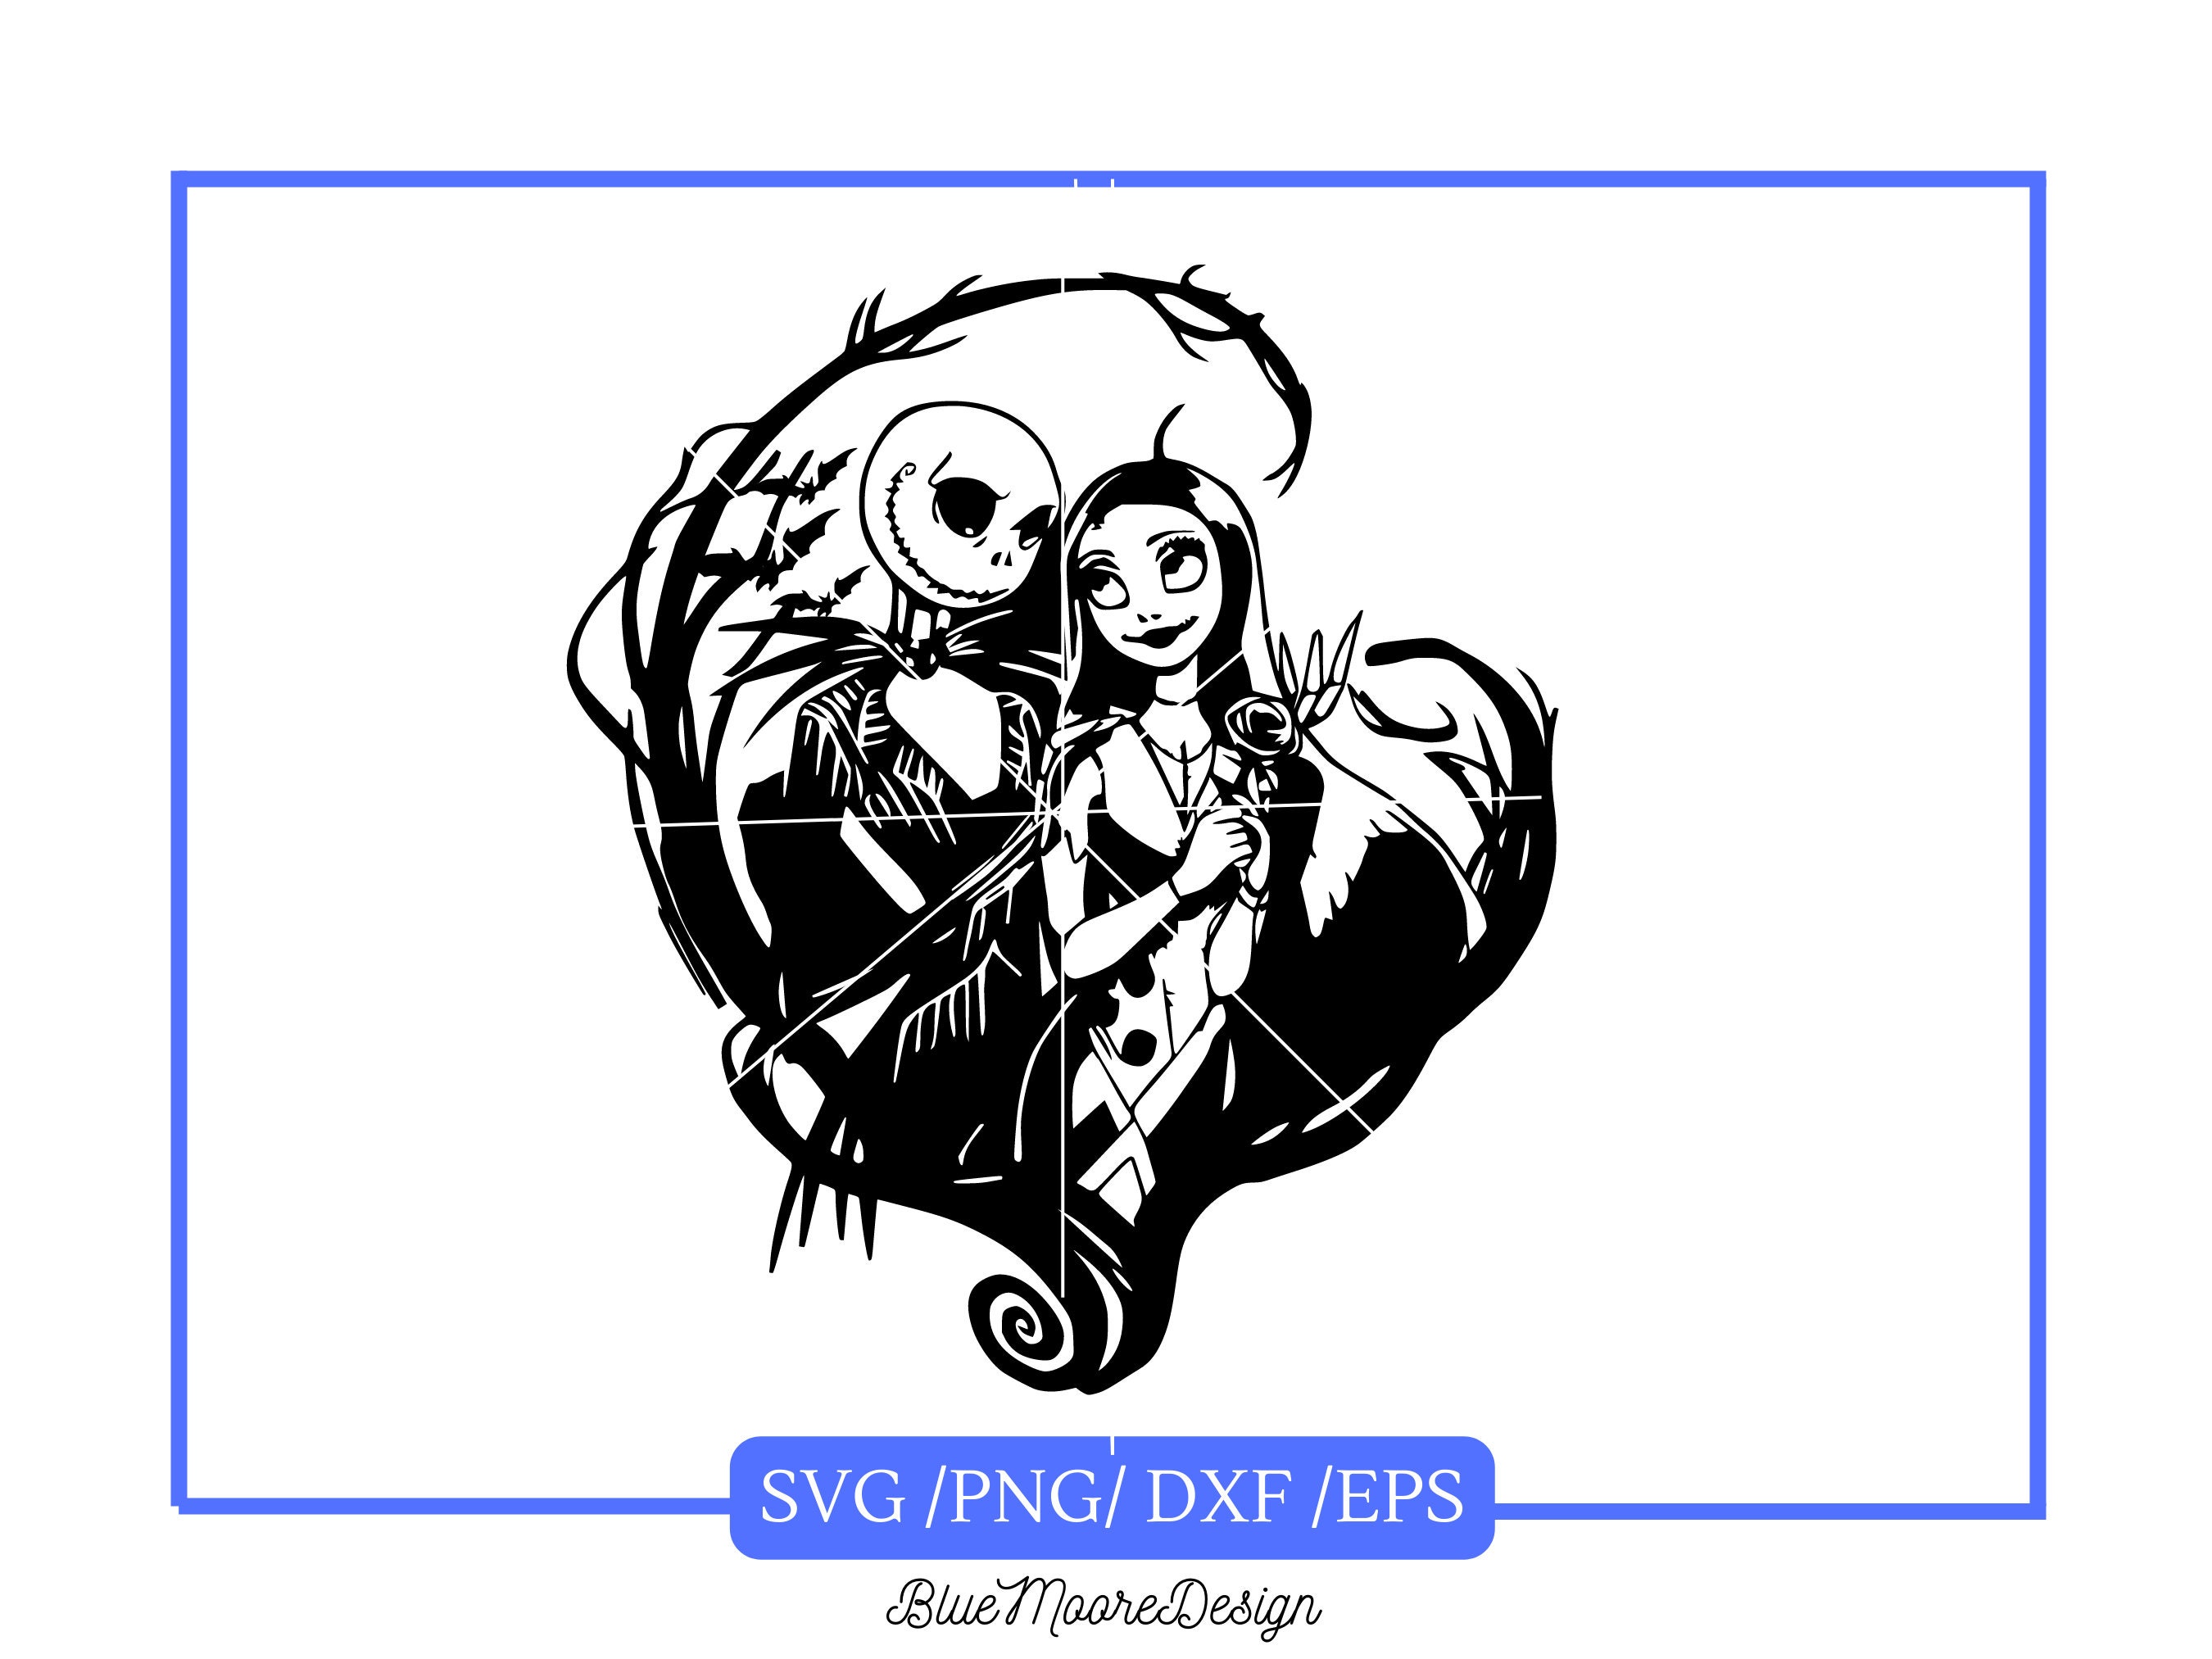 1. Jack and Sally Heart Tattoo Designs - wide 9